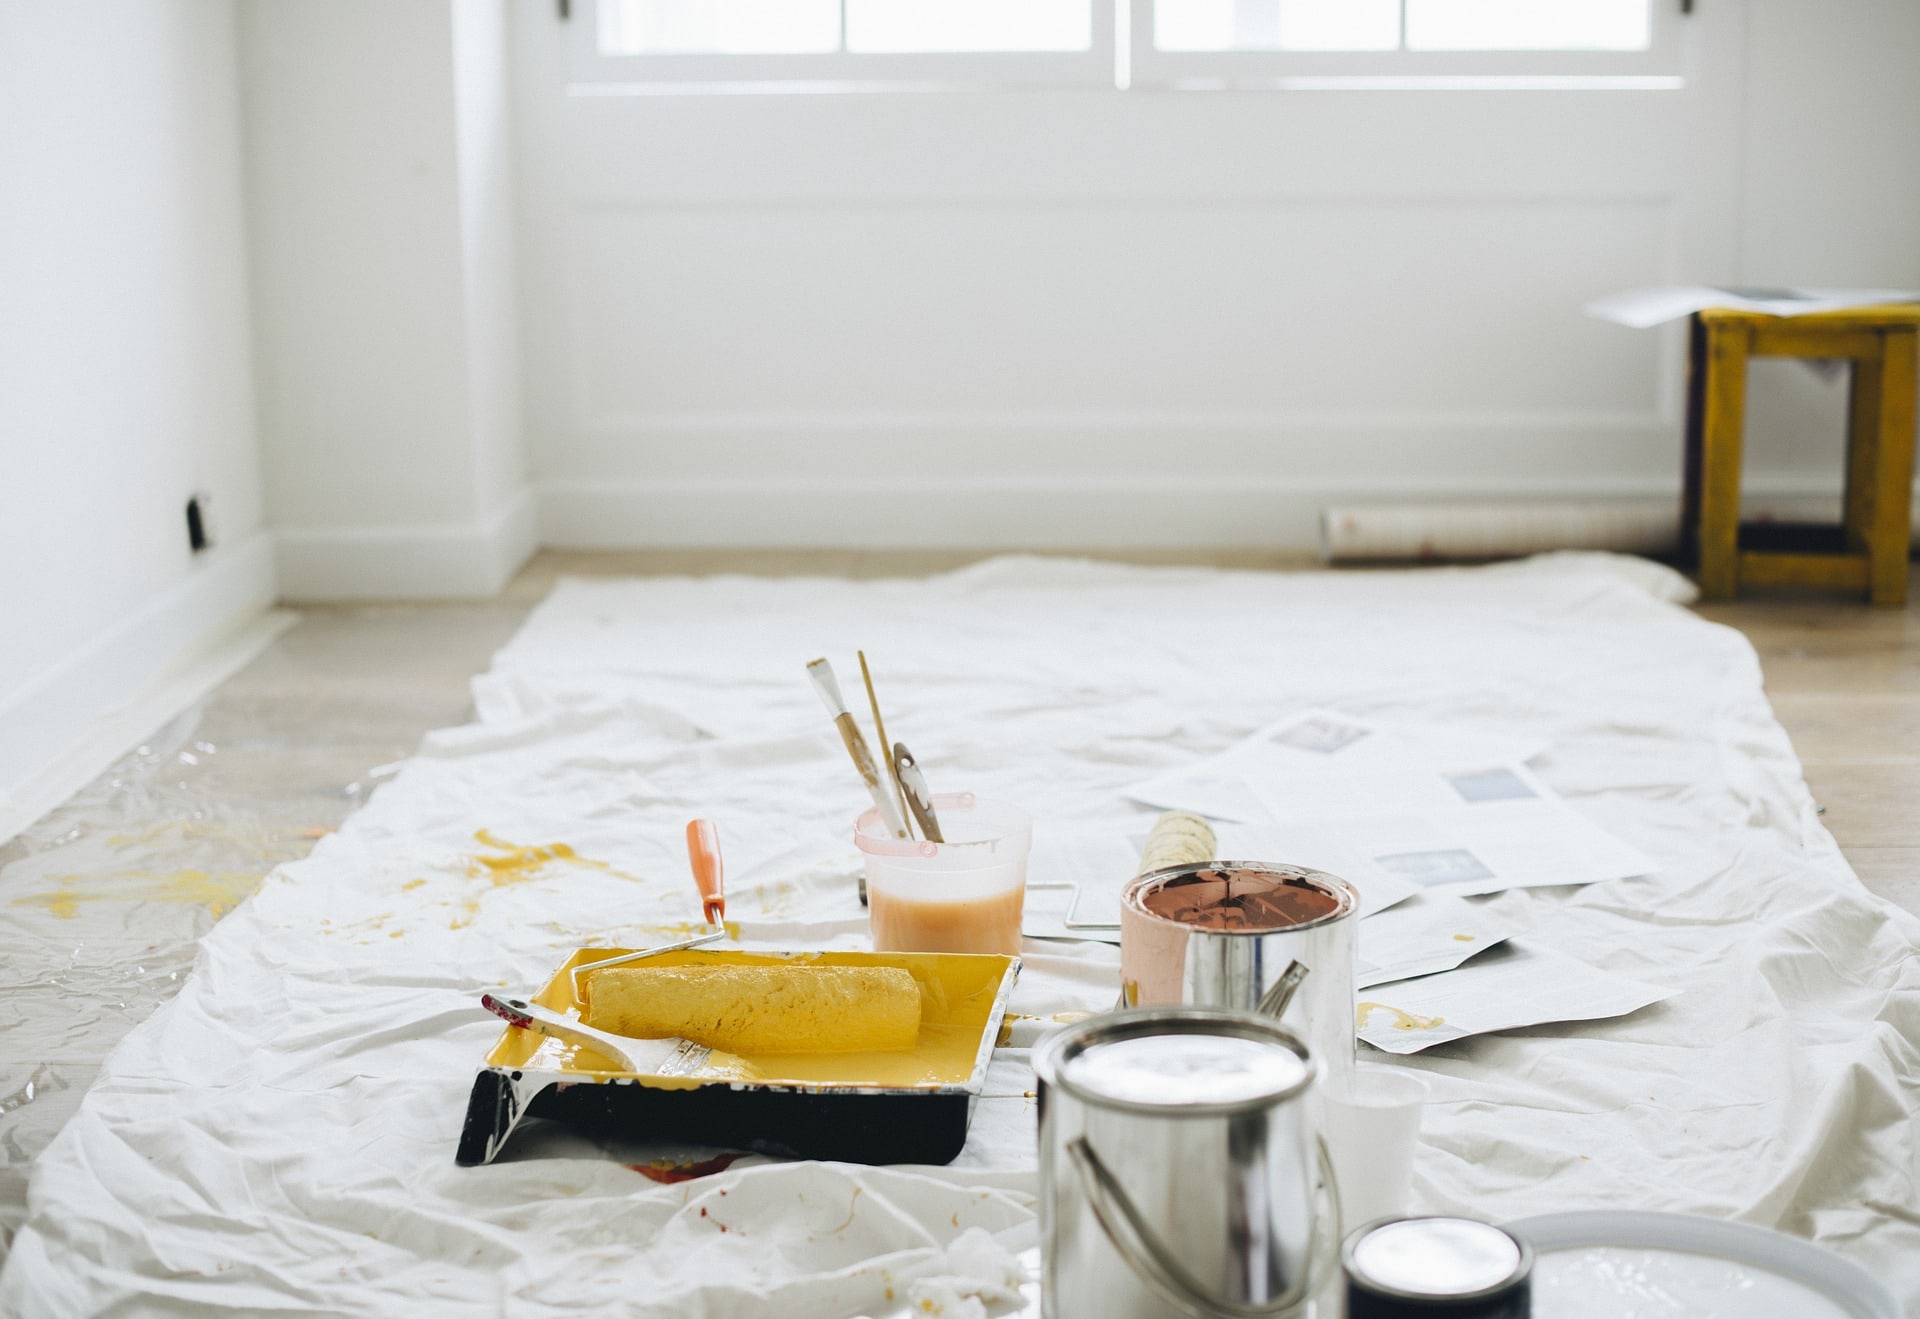 HOUSE PAINTING MISTAKES TO AVOID